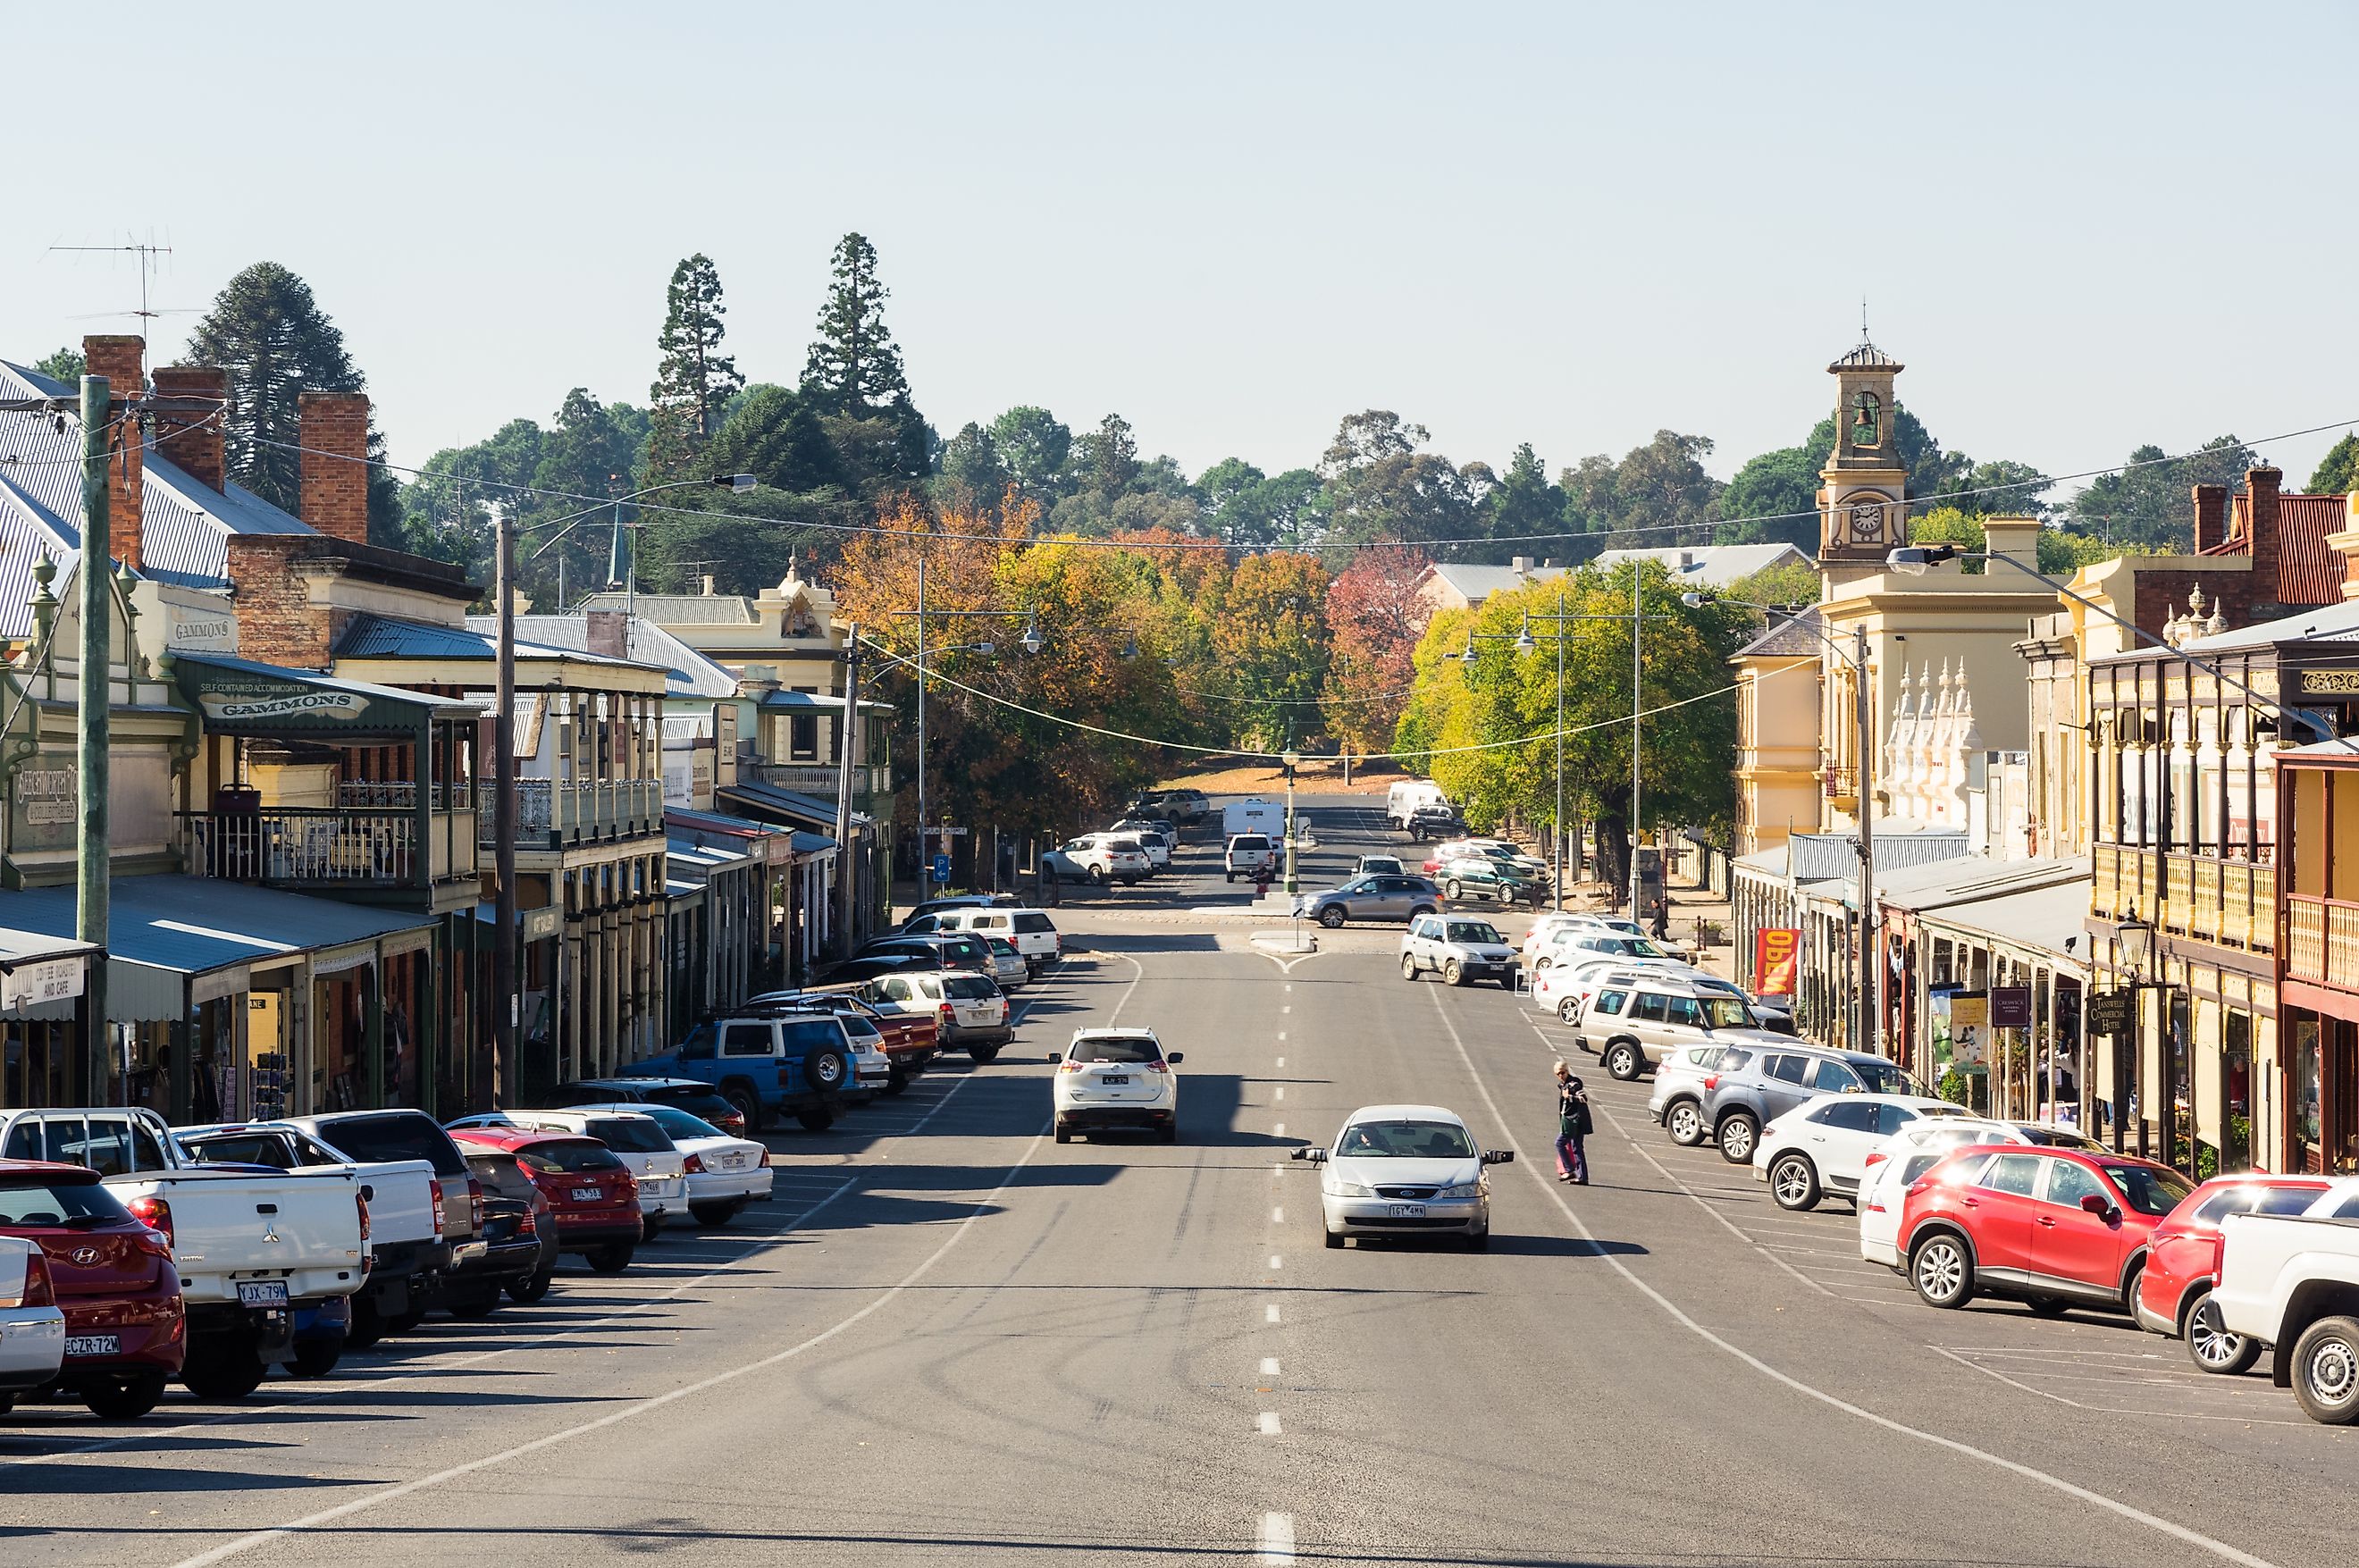 View along historic Ford Street in the goldrush town of Beechworth. By nilsversemann